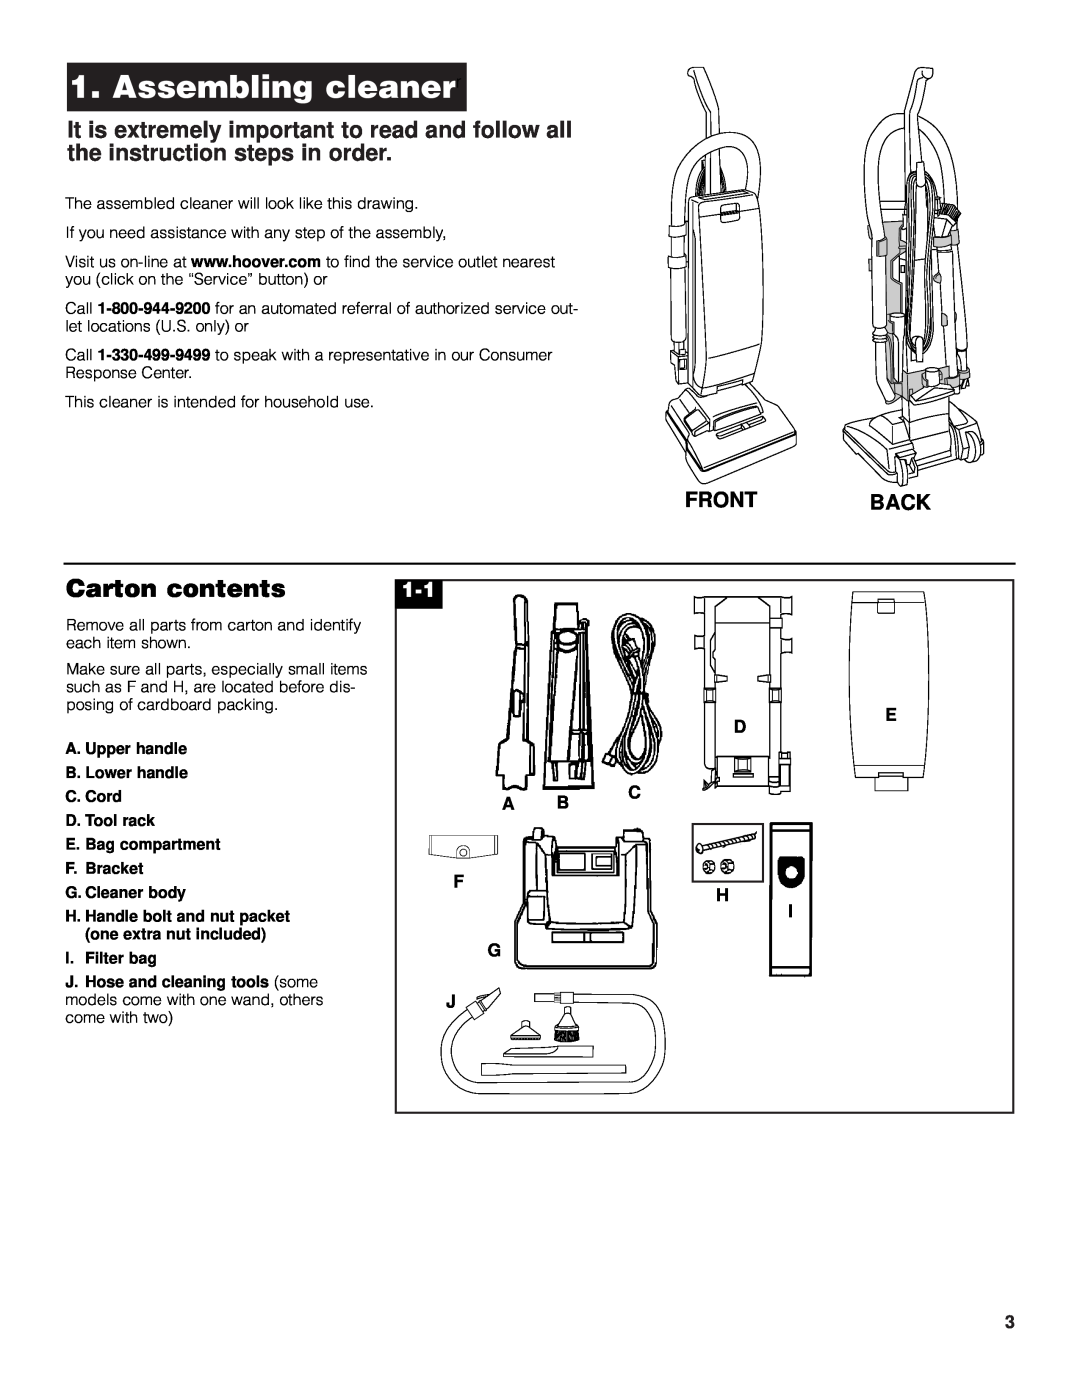 Hoover 4600 owner manual Assembling cleanerr, Carton contents 